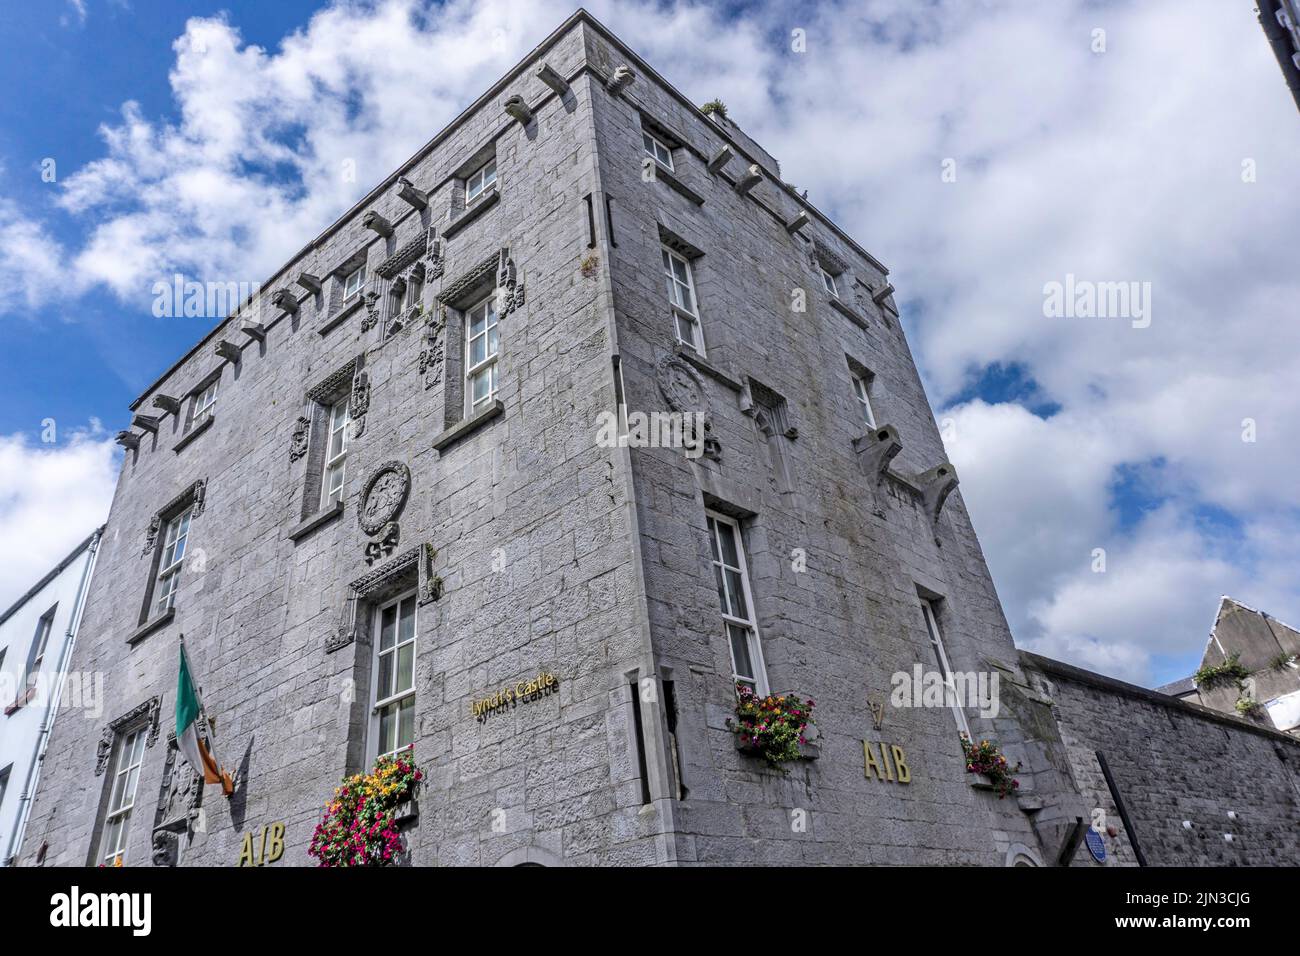 Lynchs Castle on Shop Street, Galway,  Ireland. Parts of the building date back to the 14th century. It is now home to an AIB Bank. Stock Photo